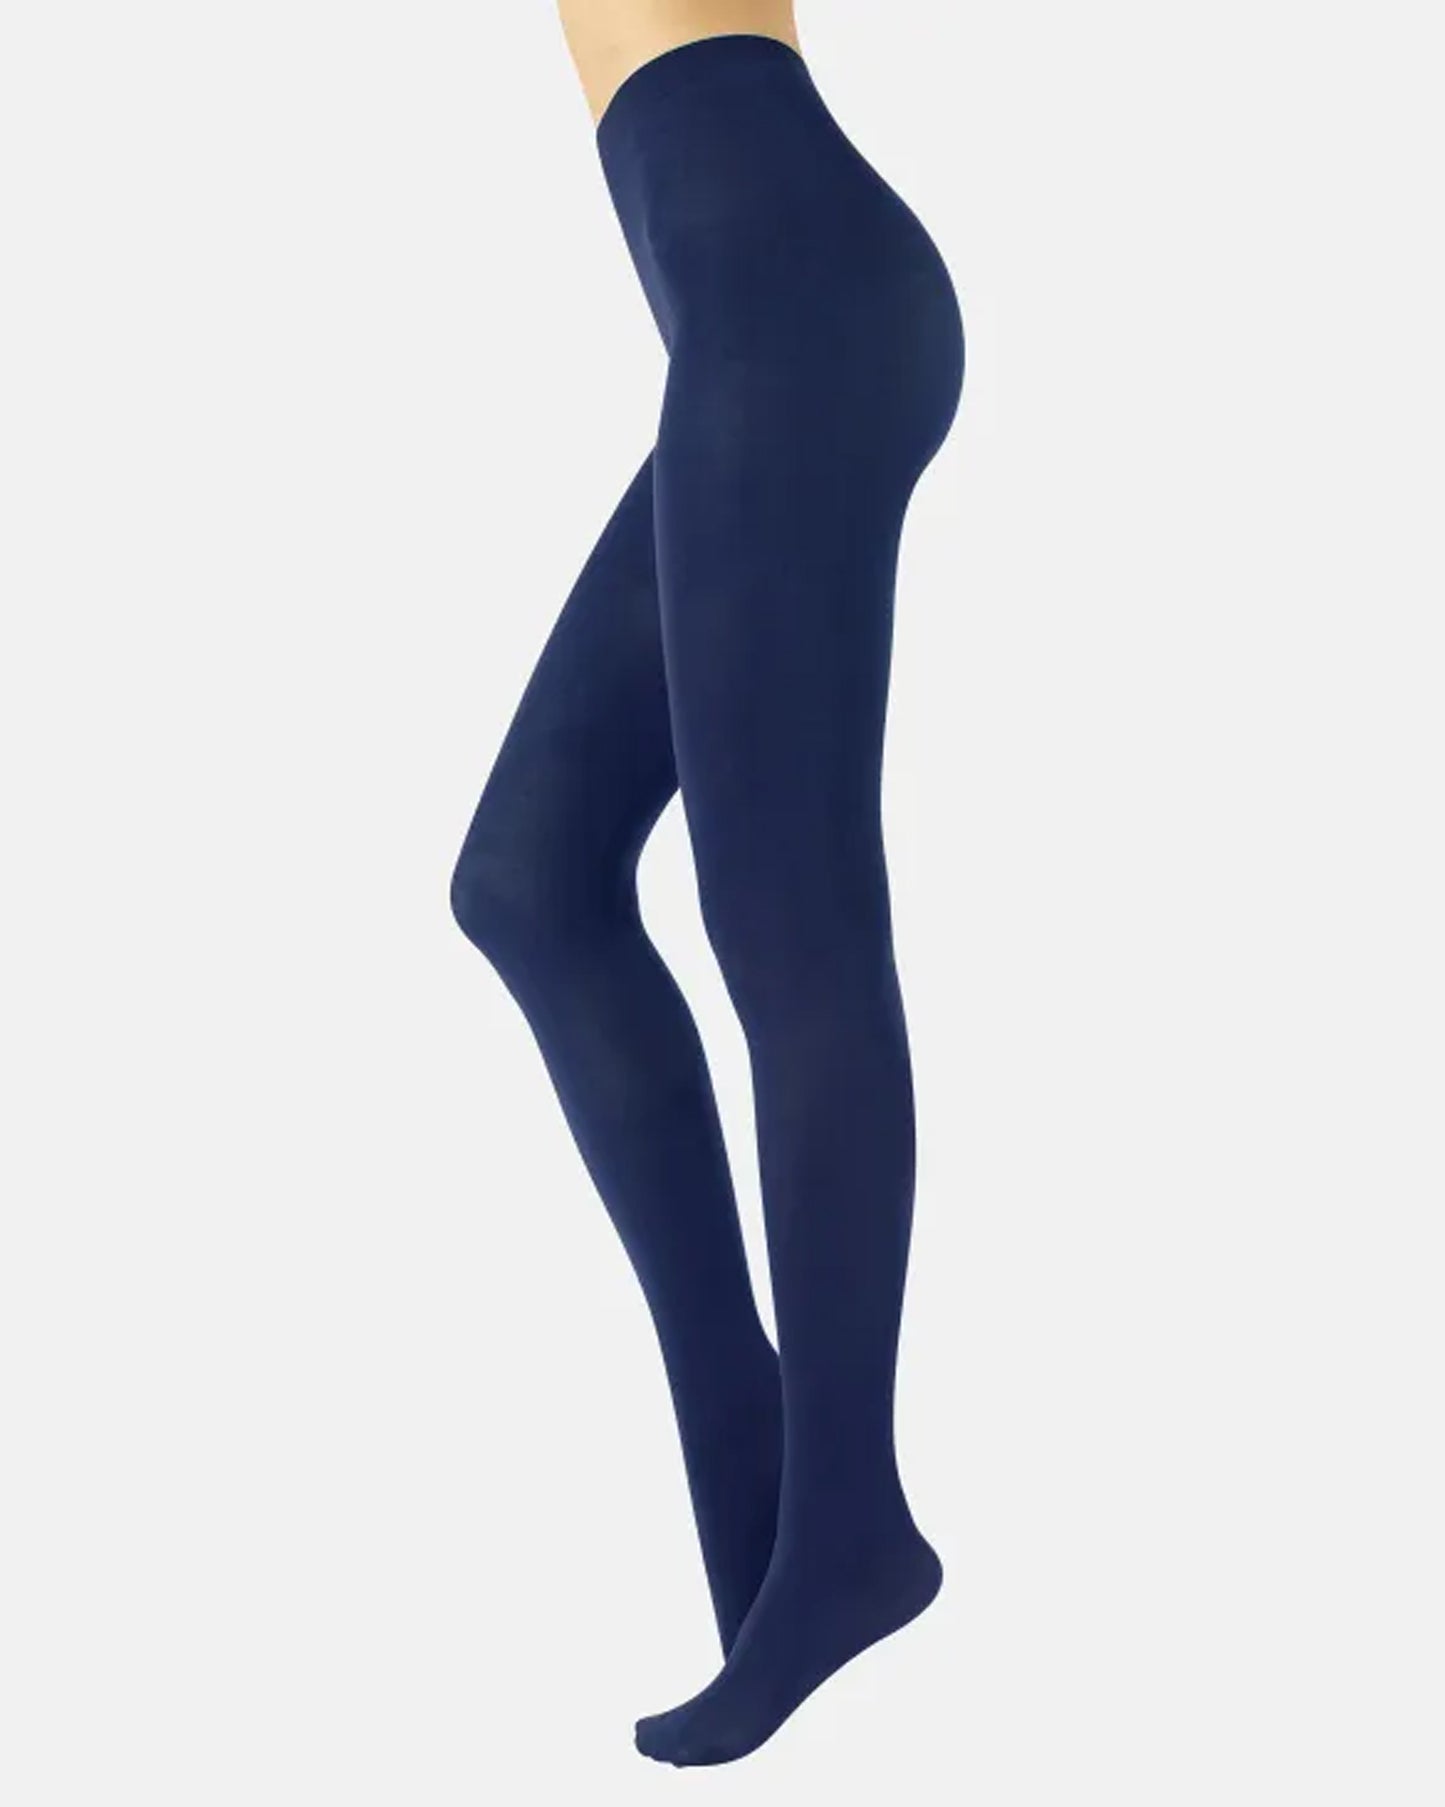 Calzitaly Cotton Tights - Warm navy blue knitted cotton mix tights with gusset, flat seams and comfort waist band.